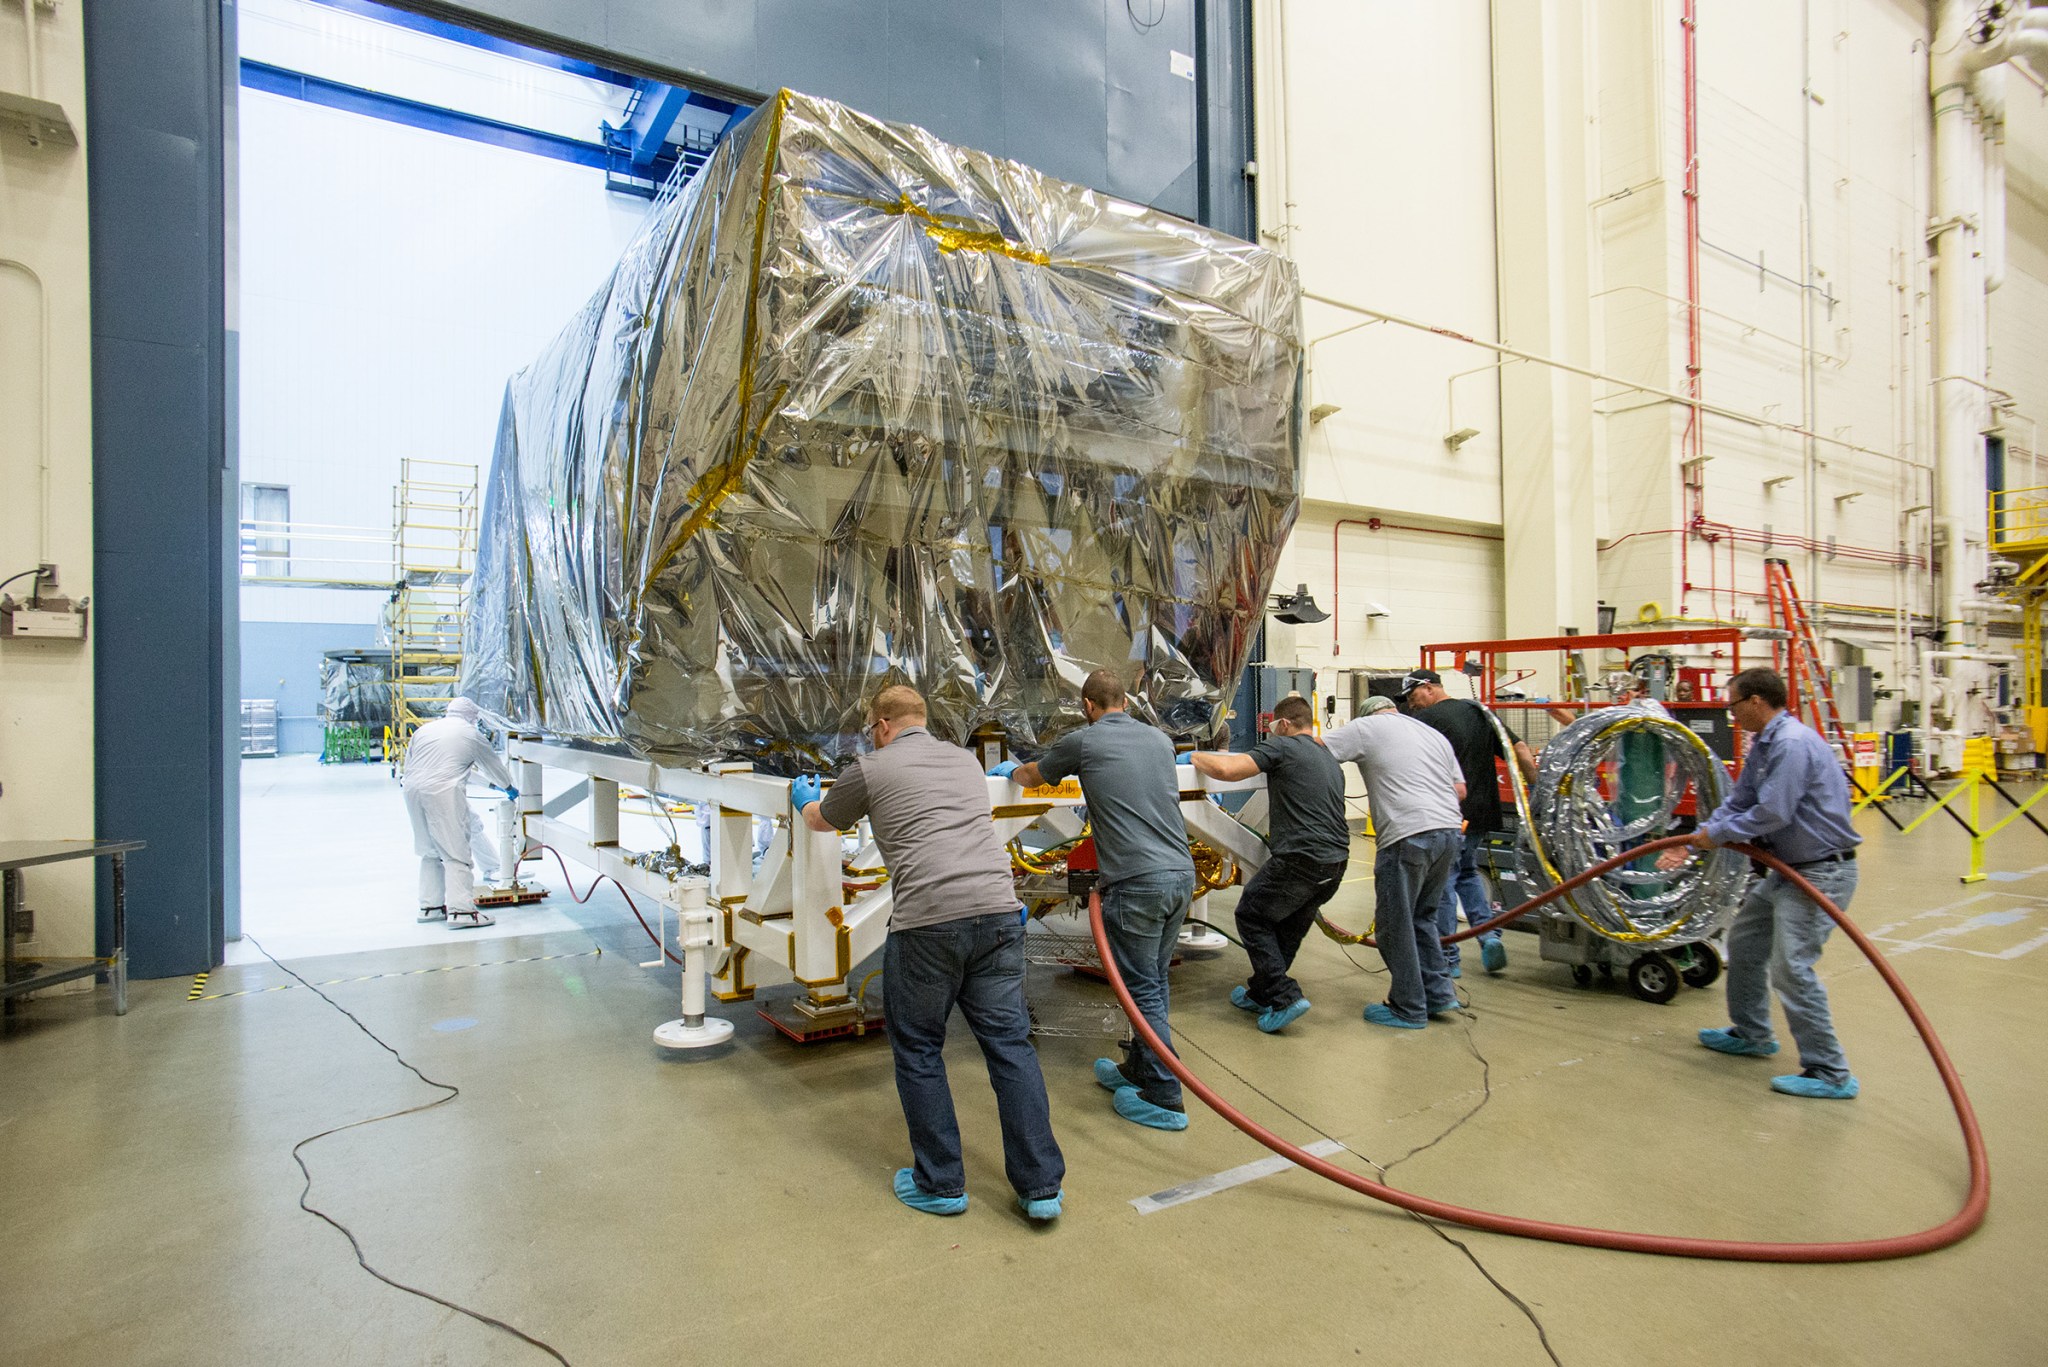 Wrapped up ISIM structure pushed back to the clean room